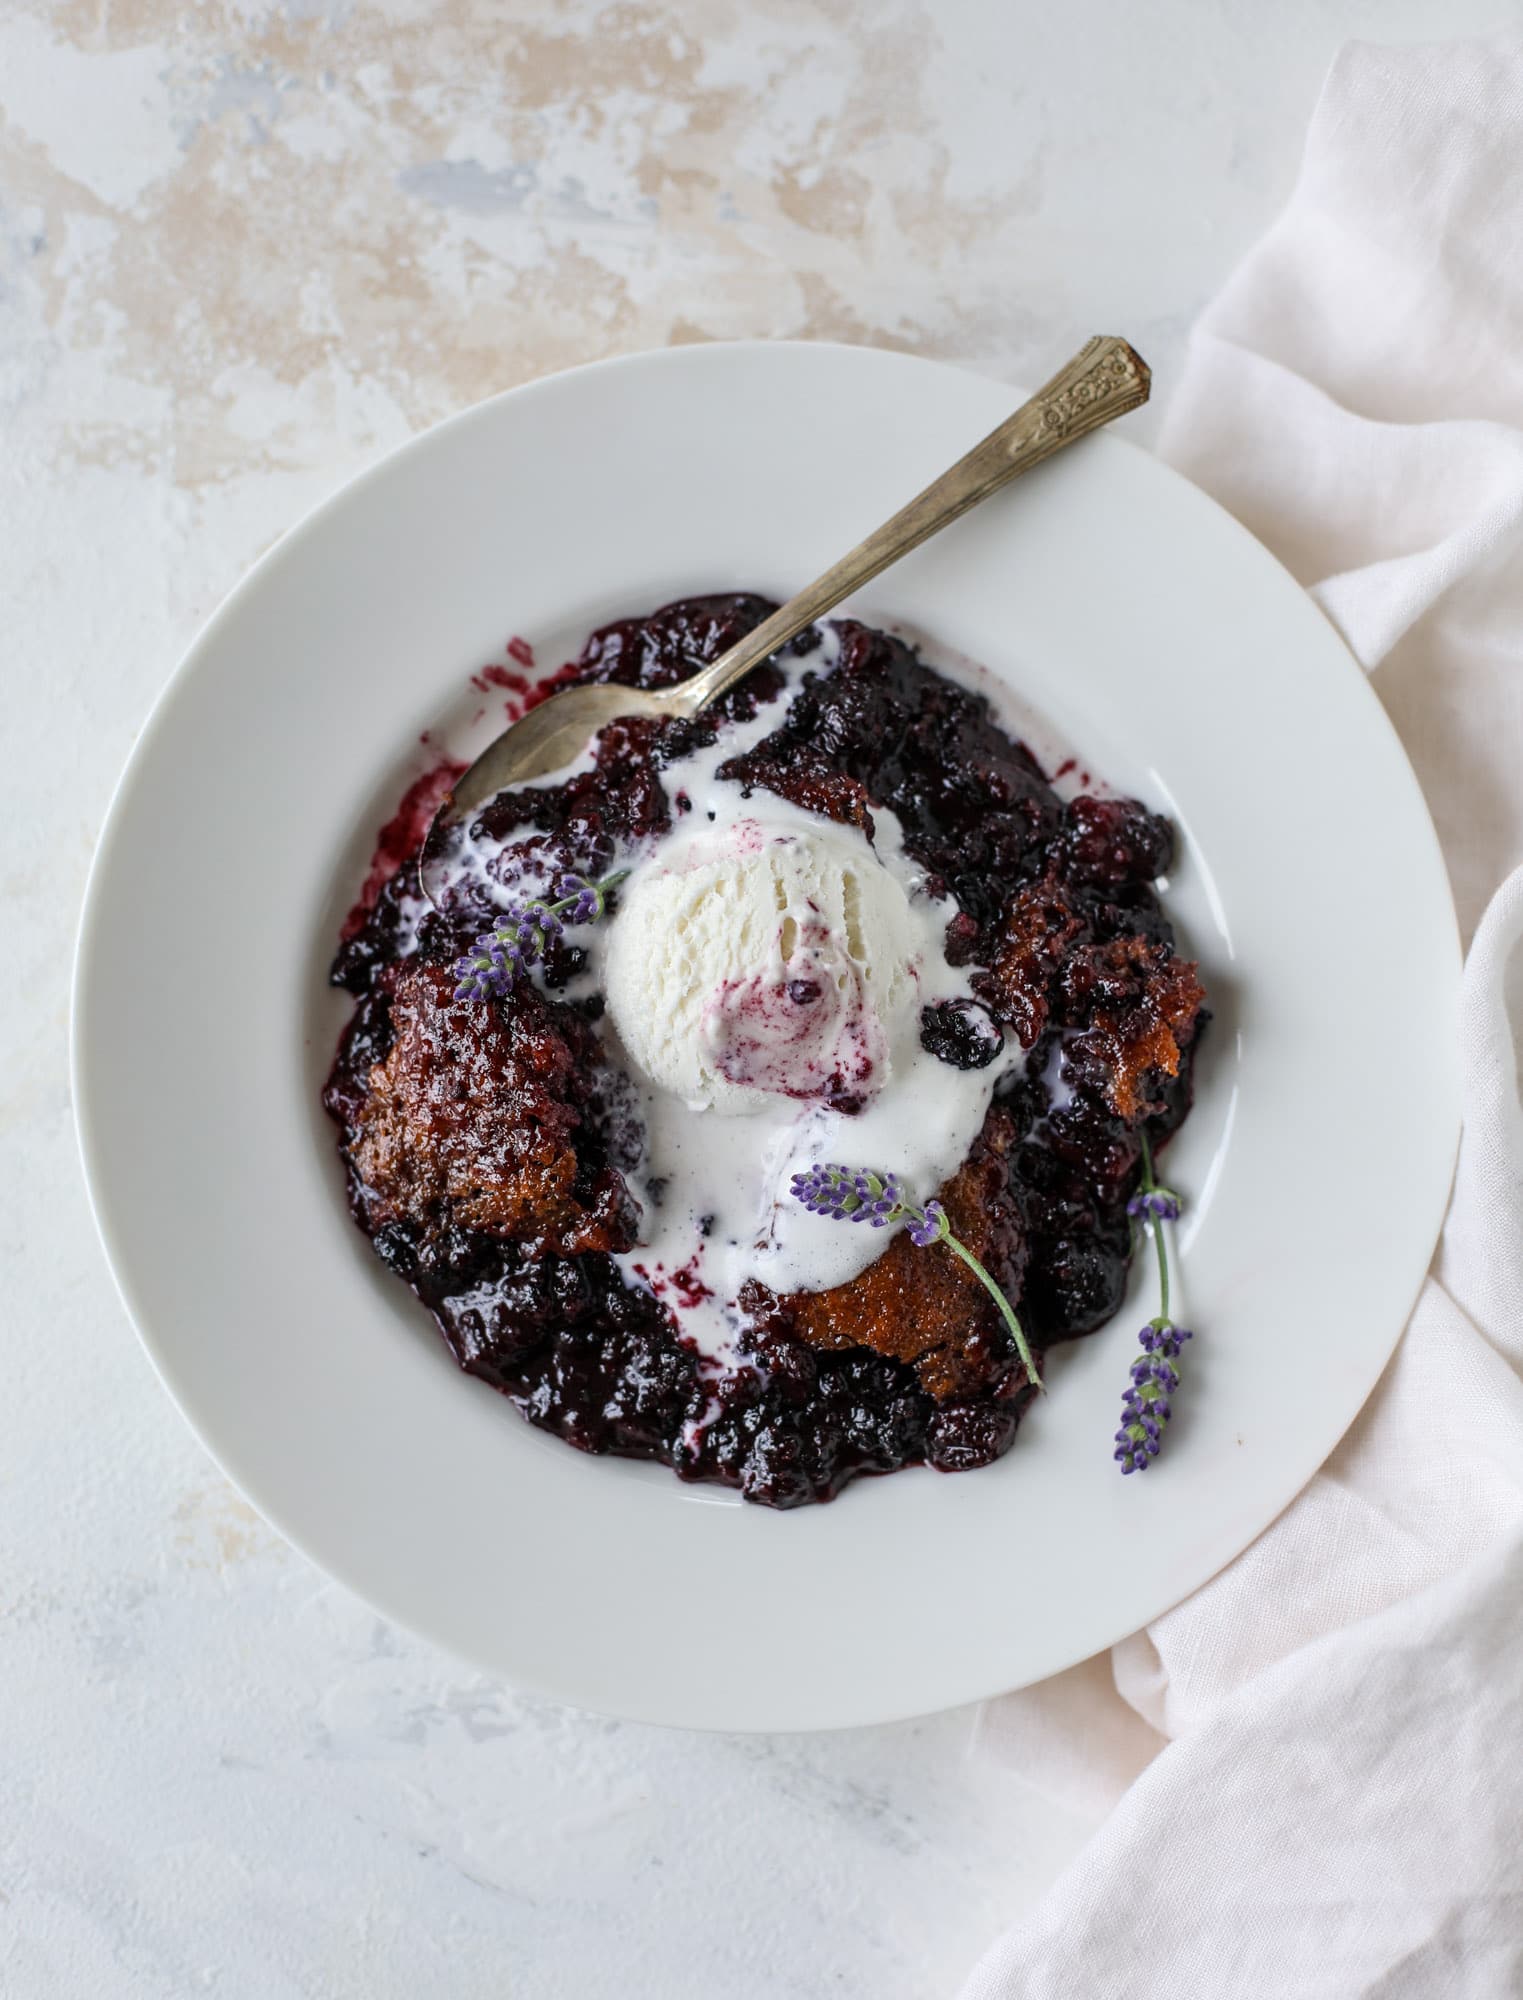 This black raspberry cobbler is a summer dream come true! The bursting black raspberries are rich and sweet, then add in a touch of lavender for incredible flavor and you're all set. The cobbler cake topping is perfect for vanilla ice cream. Win! I howsweeteats.com #black #raspberry #cobbler #lavender #summer #desserts #icecream